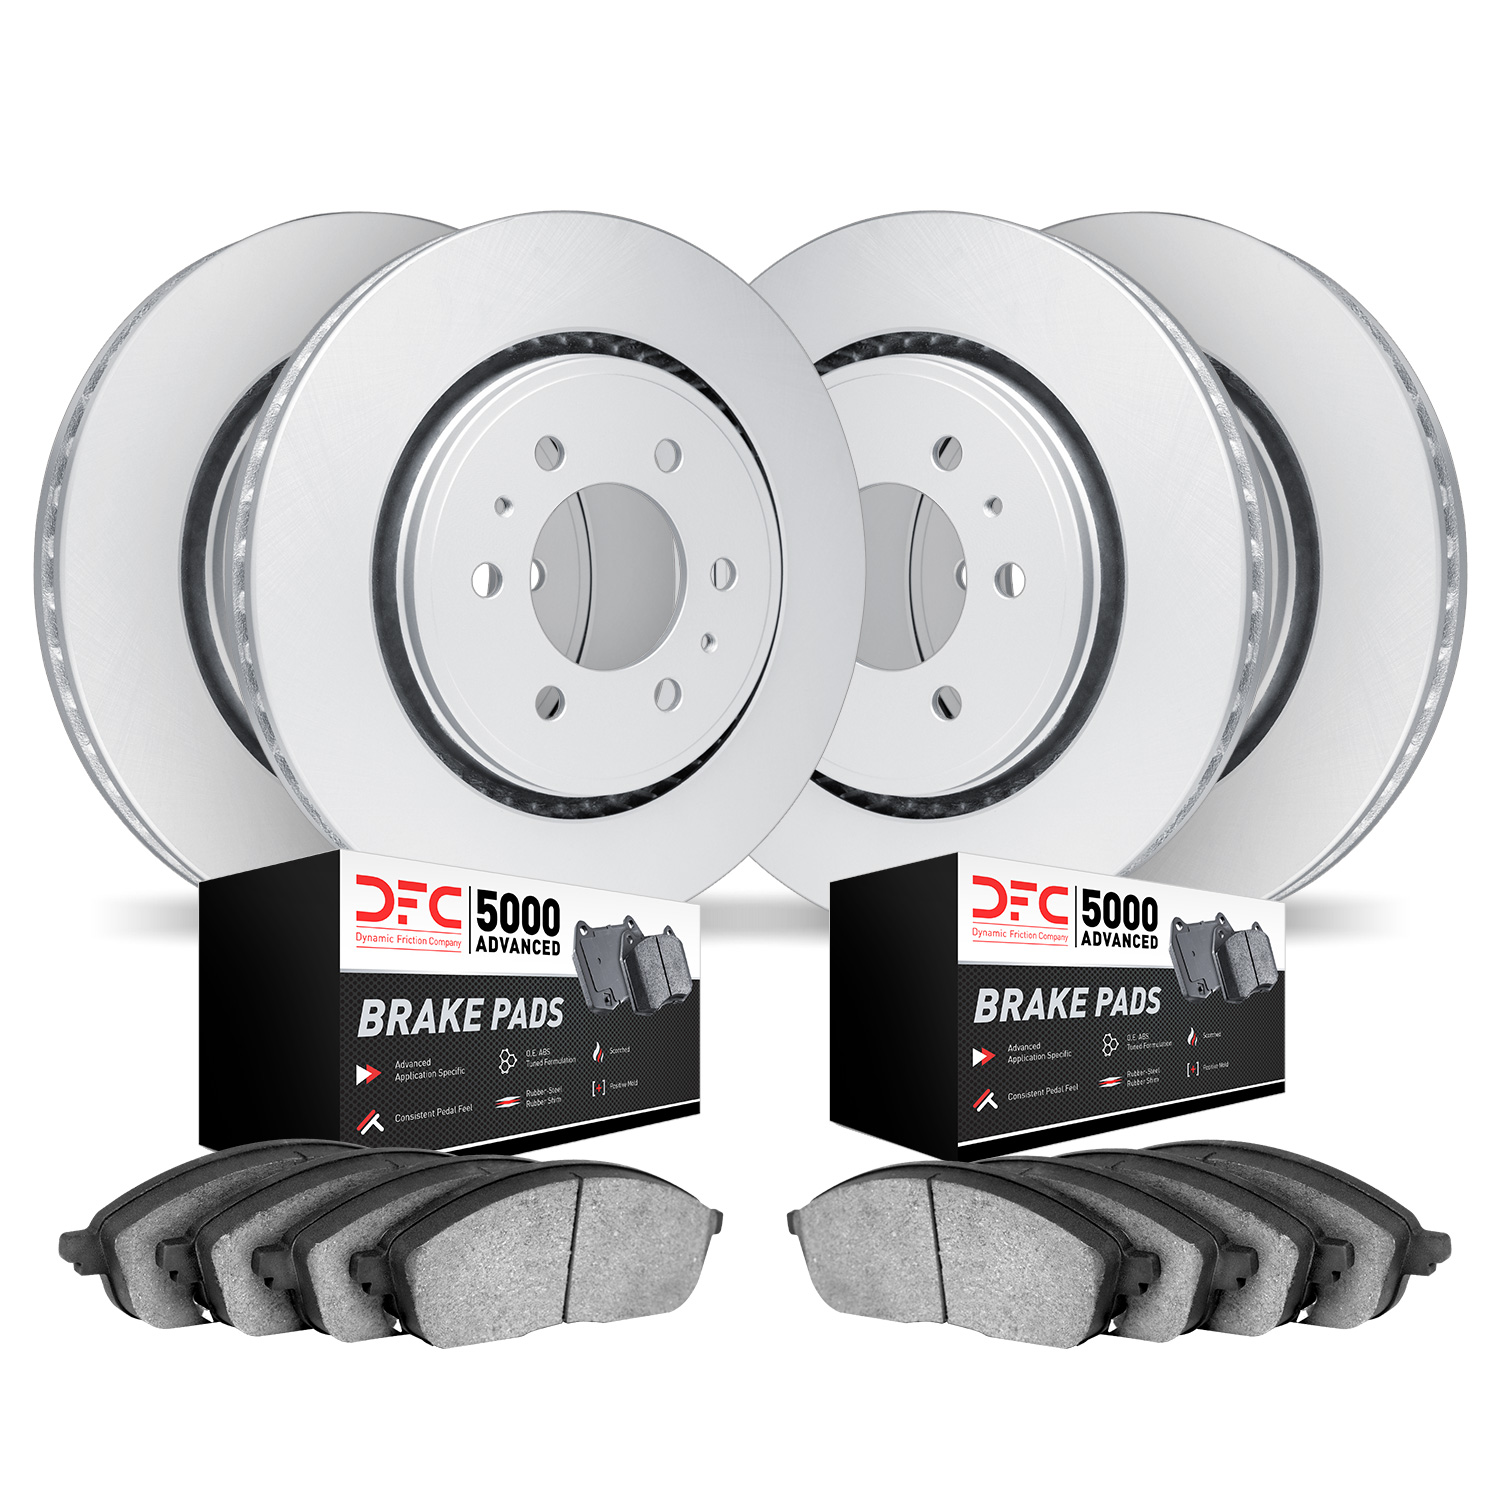 4504-48038 Geospec Brake Rotors w/5000 Advanced Brake Pads Kit, 2009-2014 GM, Position: Front and Rear